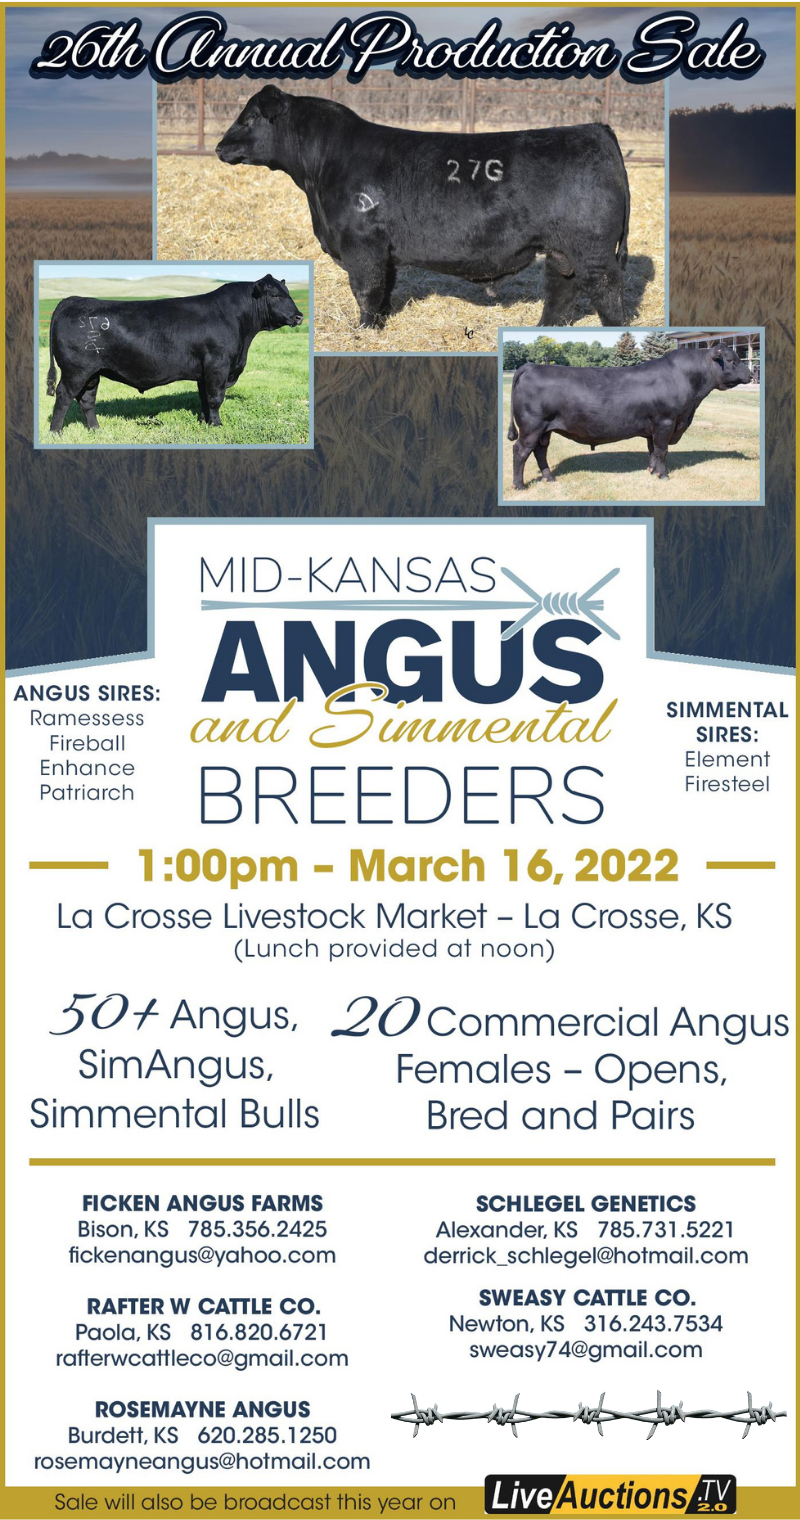 Mid Kansas Angus and Simmental Breeders Sale Flyer March 16, 2022